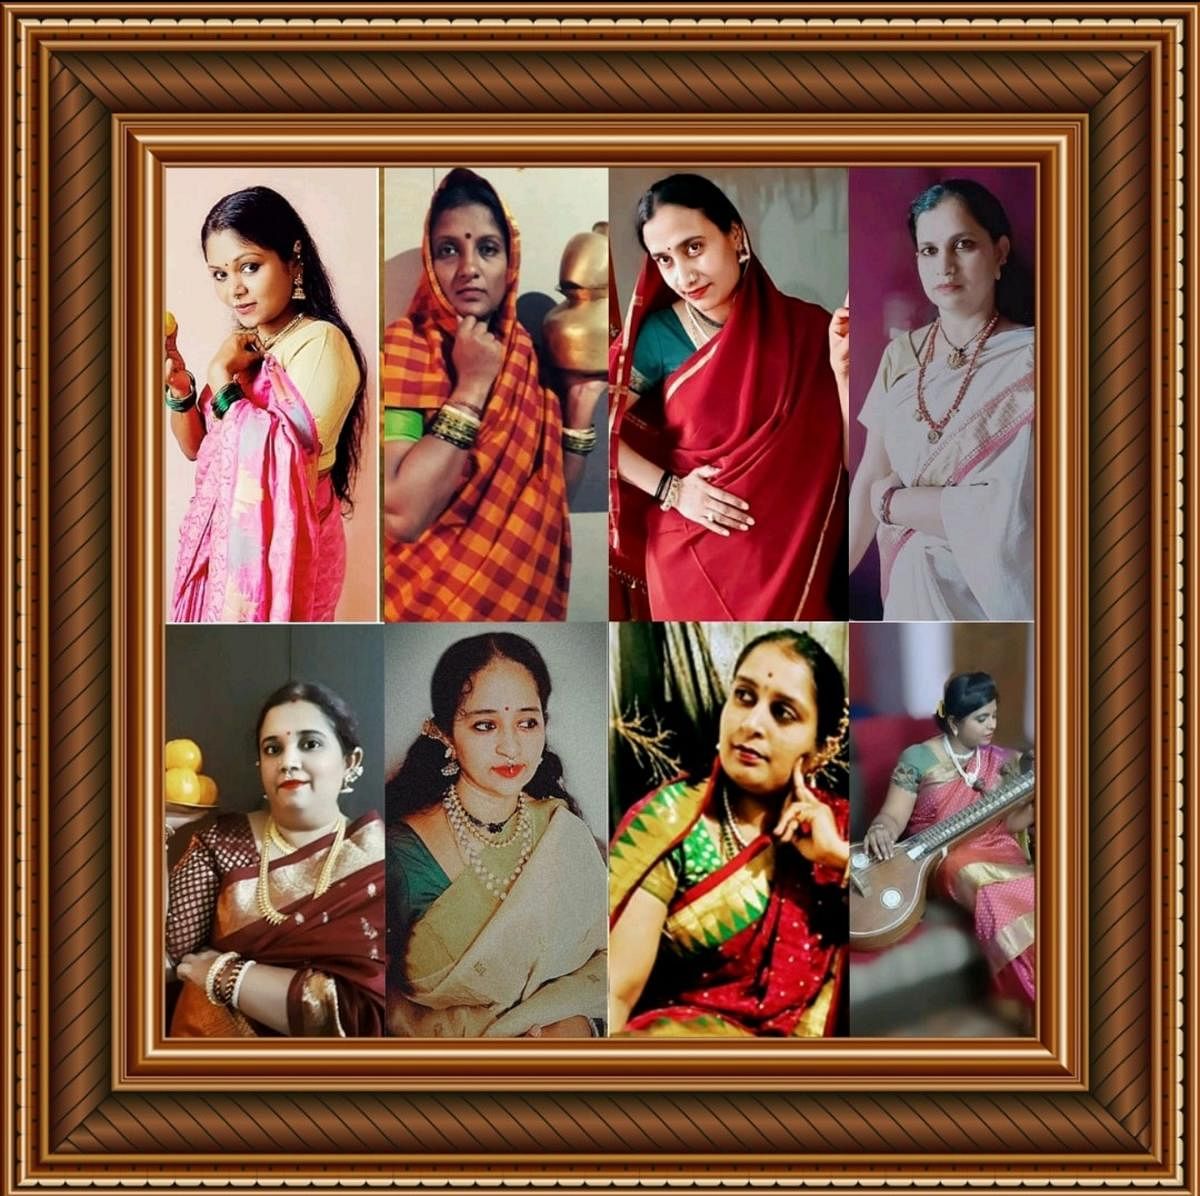 During the lockdown, Yogitha Jagadeesh and her friends posed as characters from Raja Ravi Varma’s paintings. They have made a collage from it as a Friendship Day memento. (Top row, from left) Preethi, Anu, Suma and Ramya. (Bottom row) Yogitha, Sapna, Prabha and Aruna.